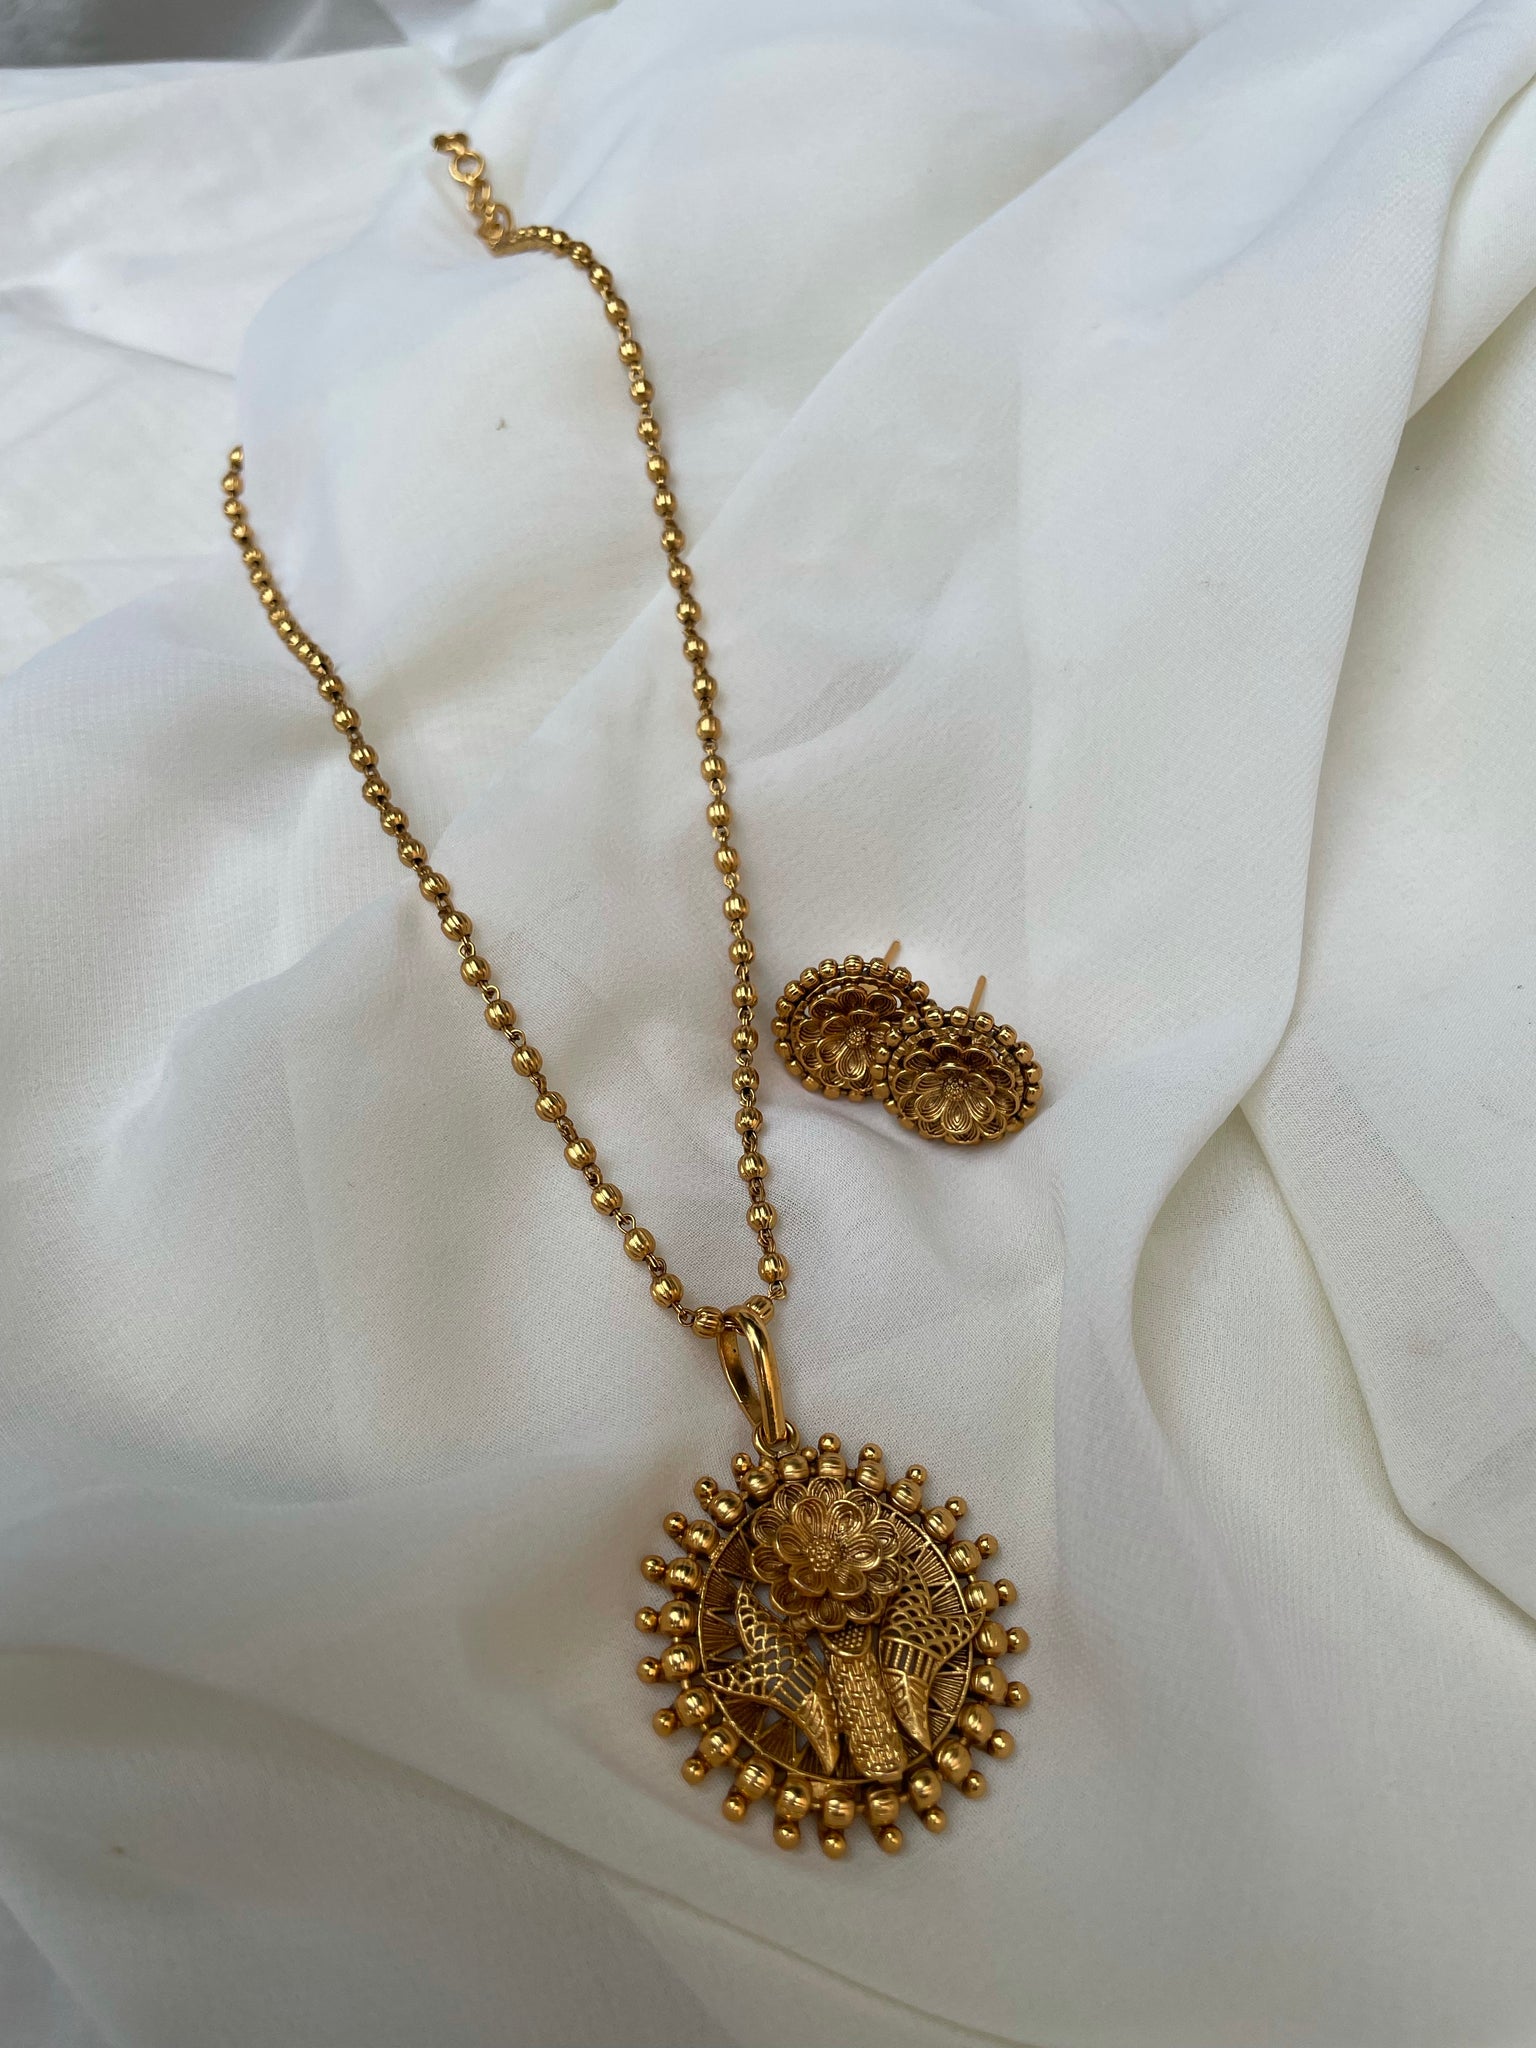 Golden flower with studs in a maala